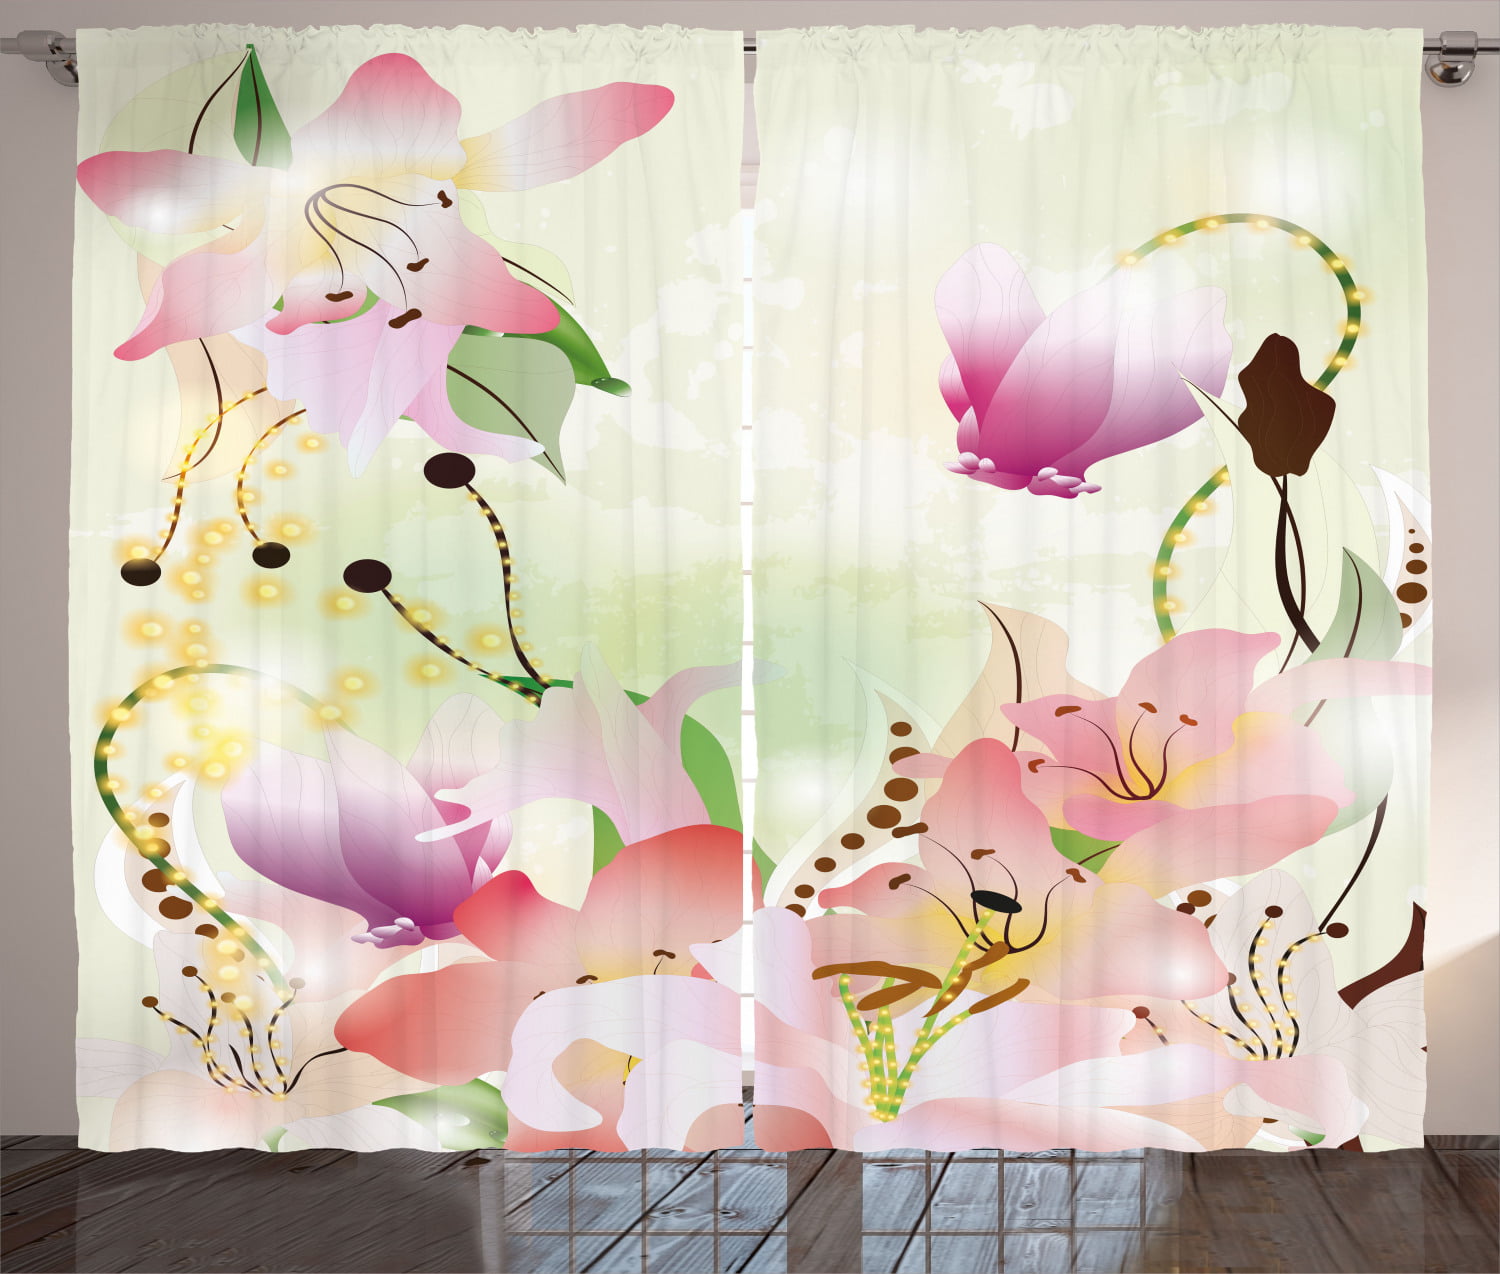 Floral Curtains 2 Panels Set, Watercolor Abstract Romantic Nature ...